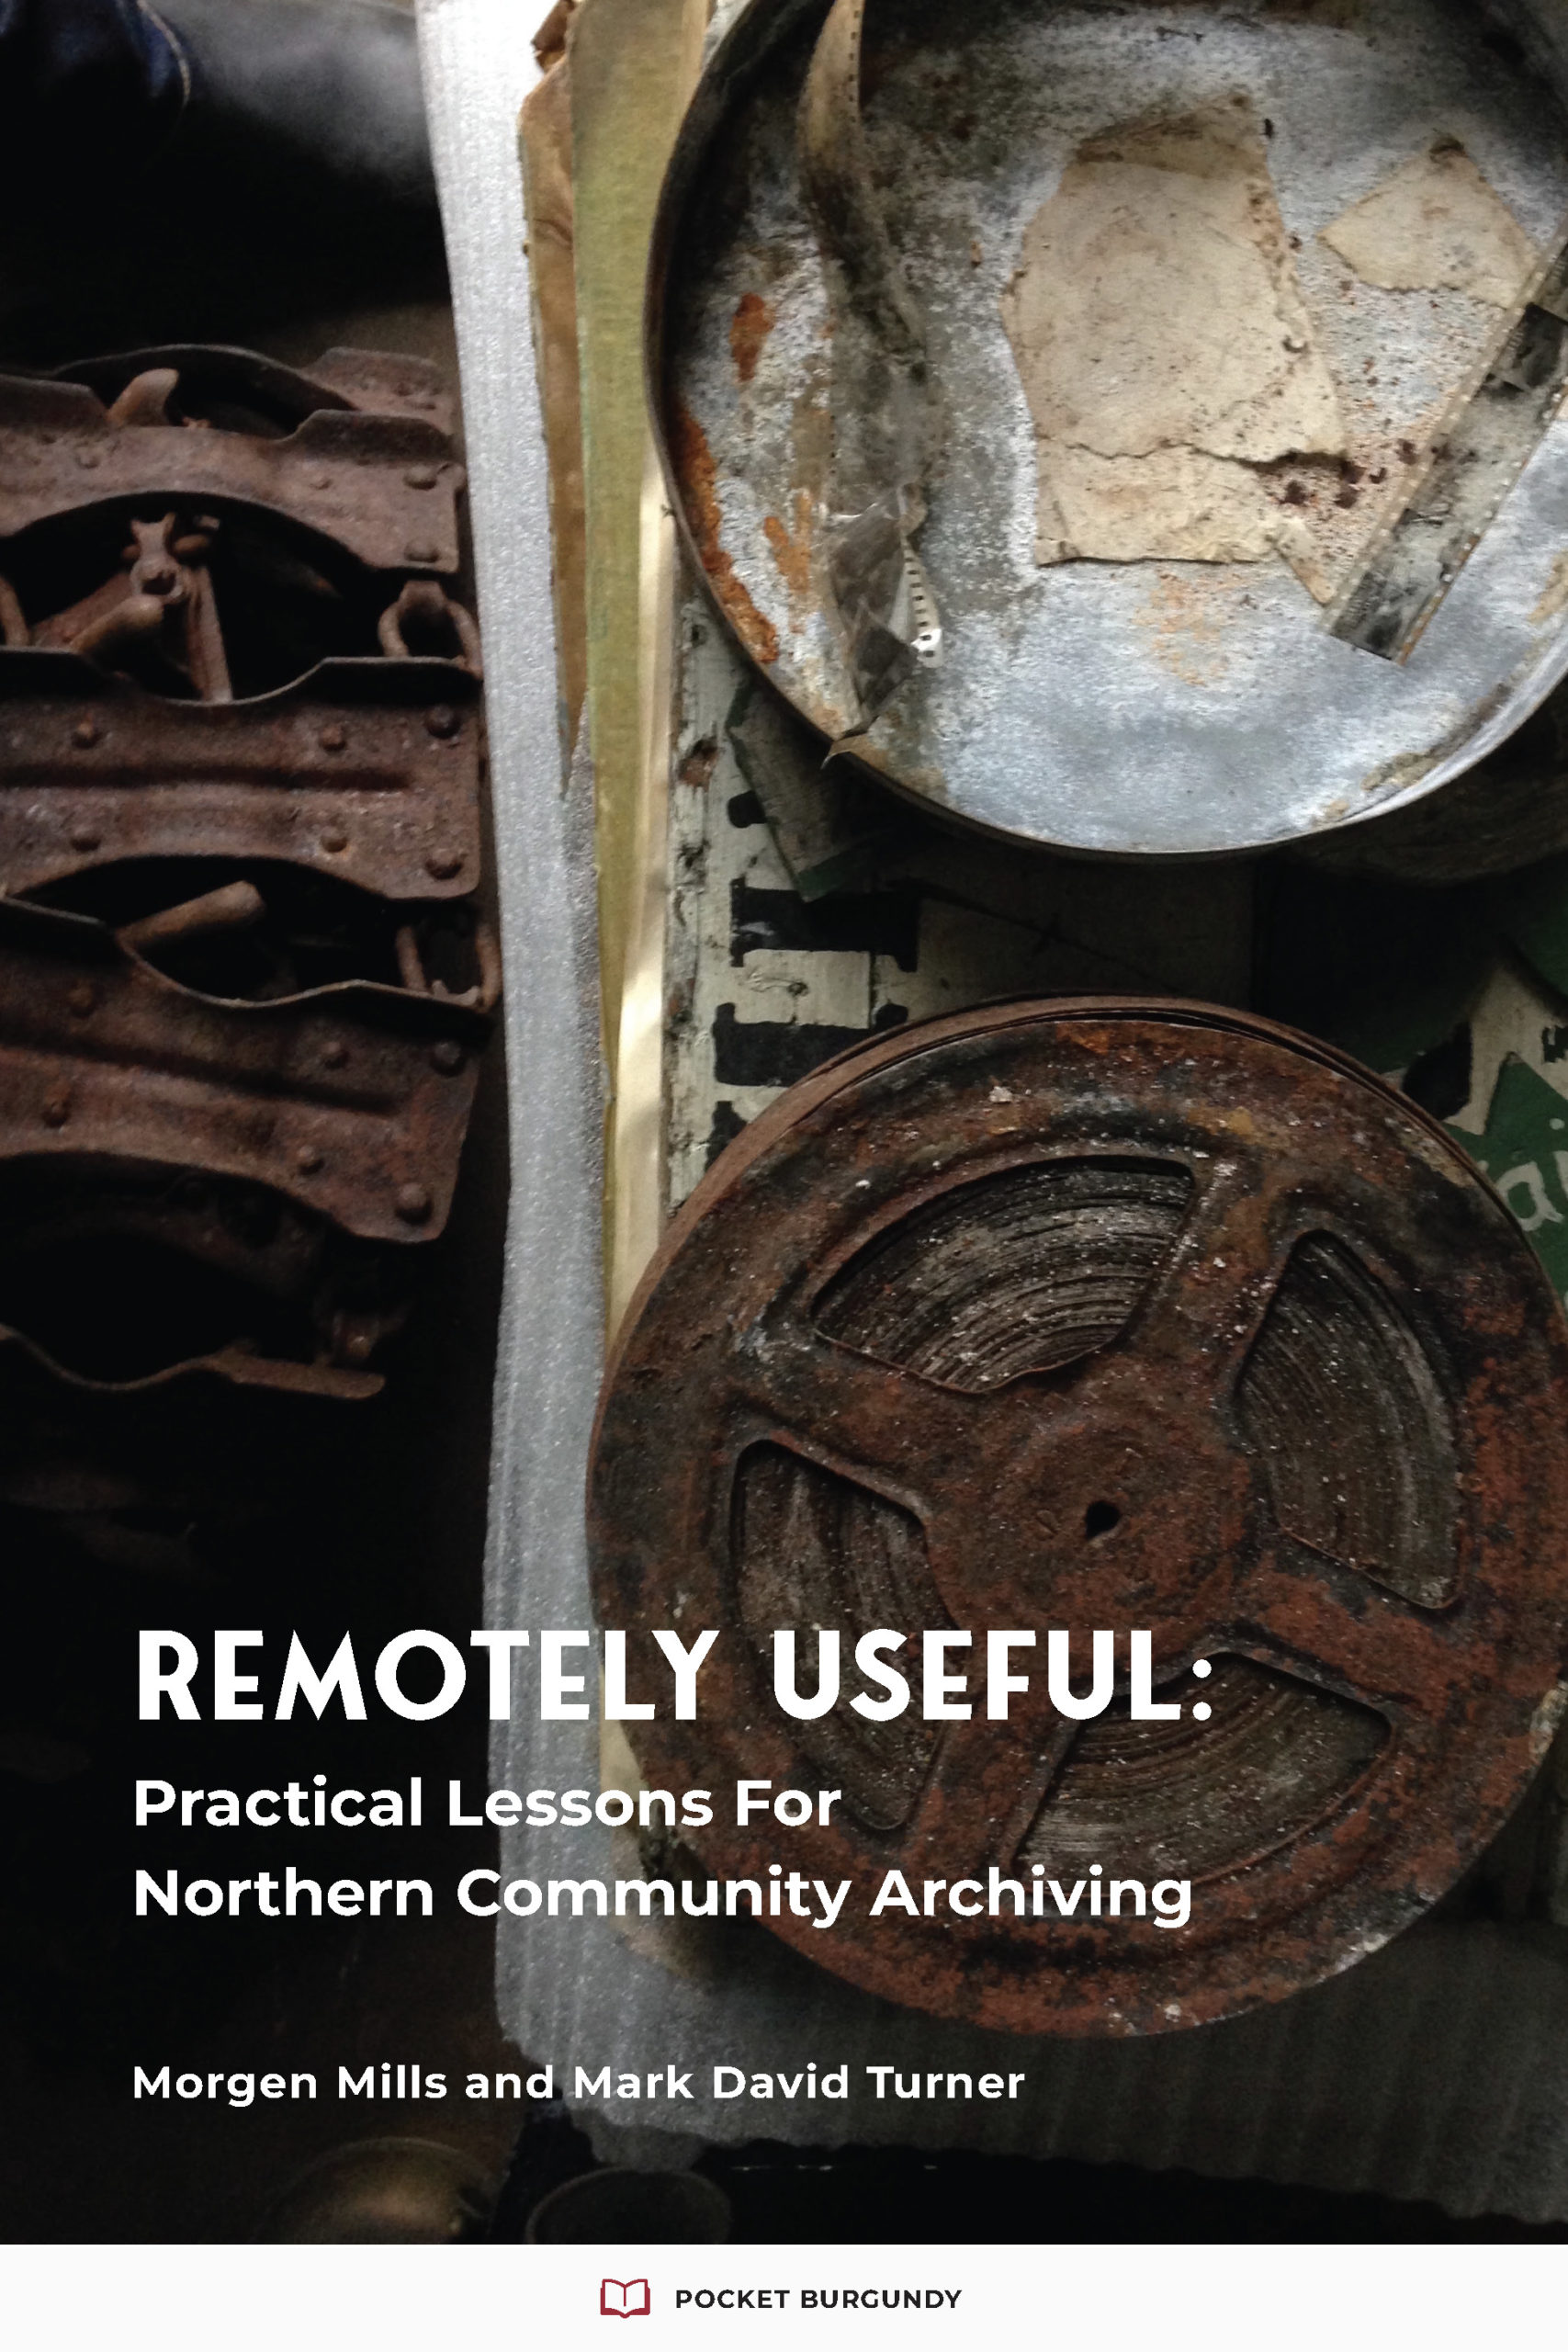 Color image of rusted audio reel tape holders and other rusted metal with report name in white letters: Remotely Useful: Practical Lessons for Northern Community Archiving